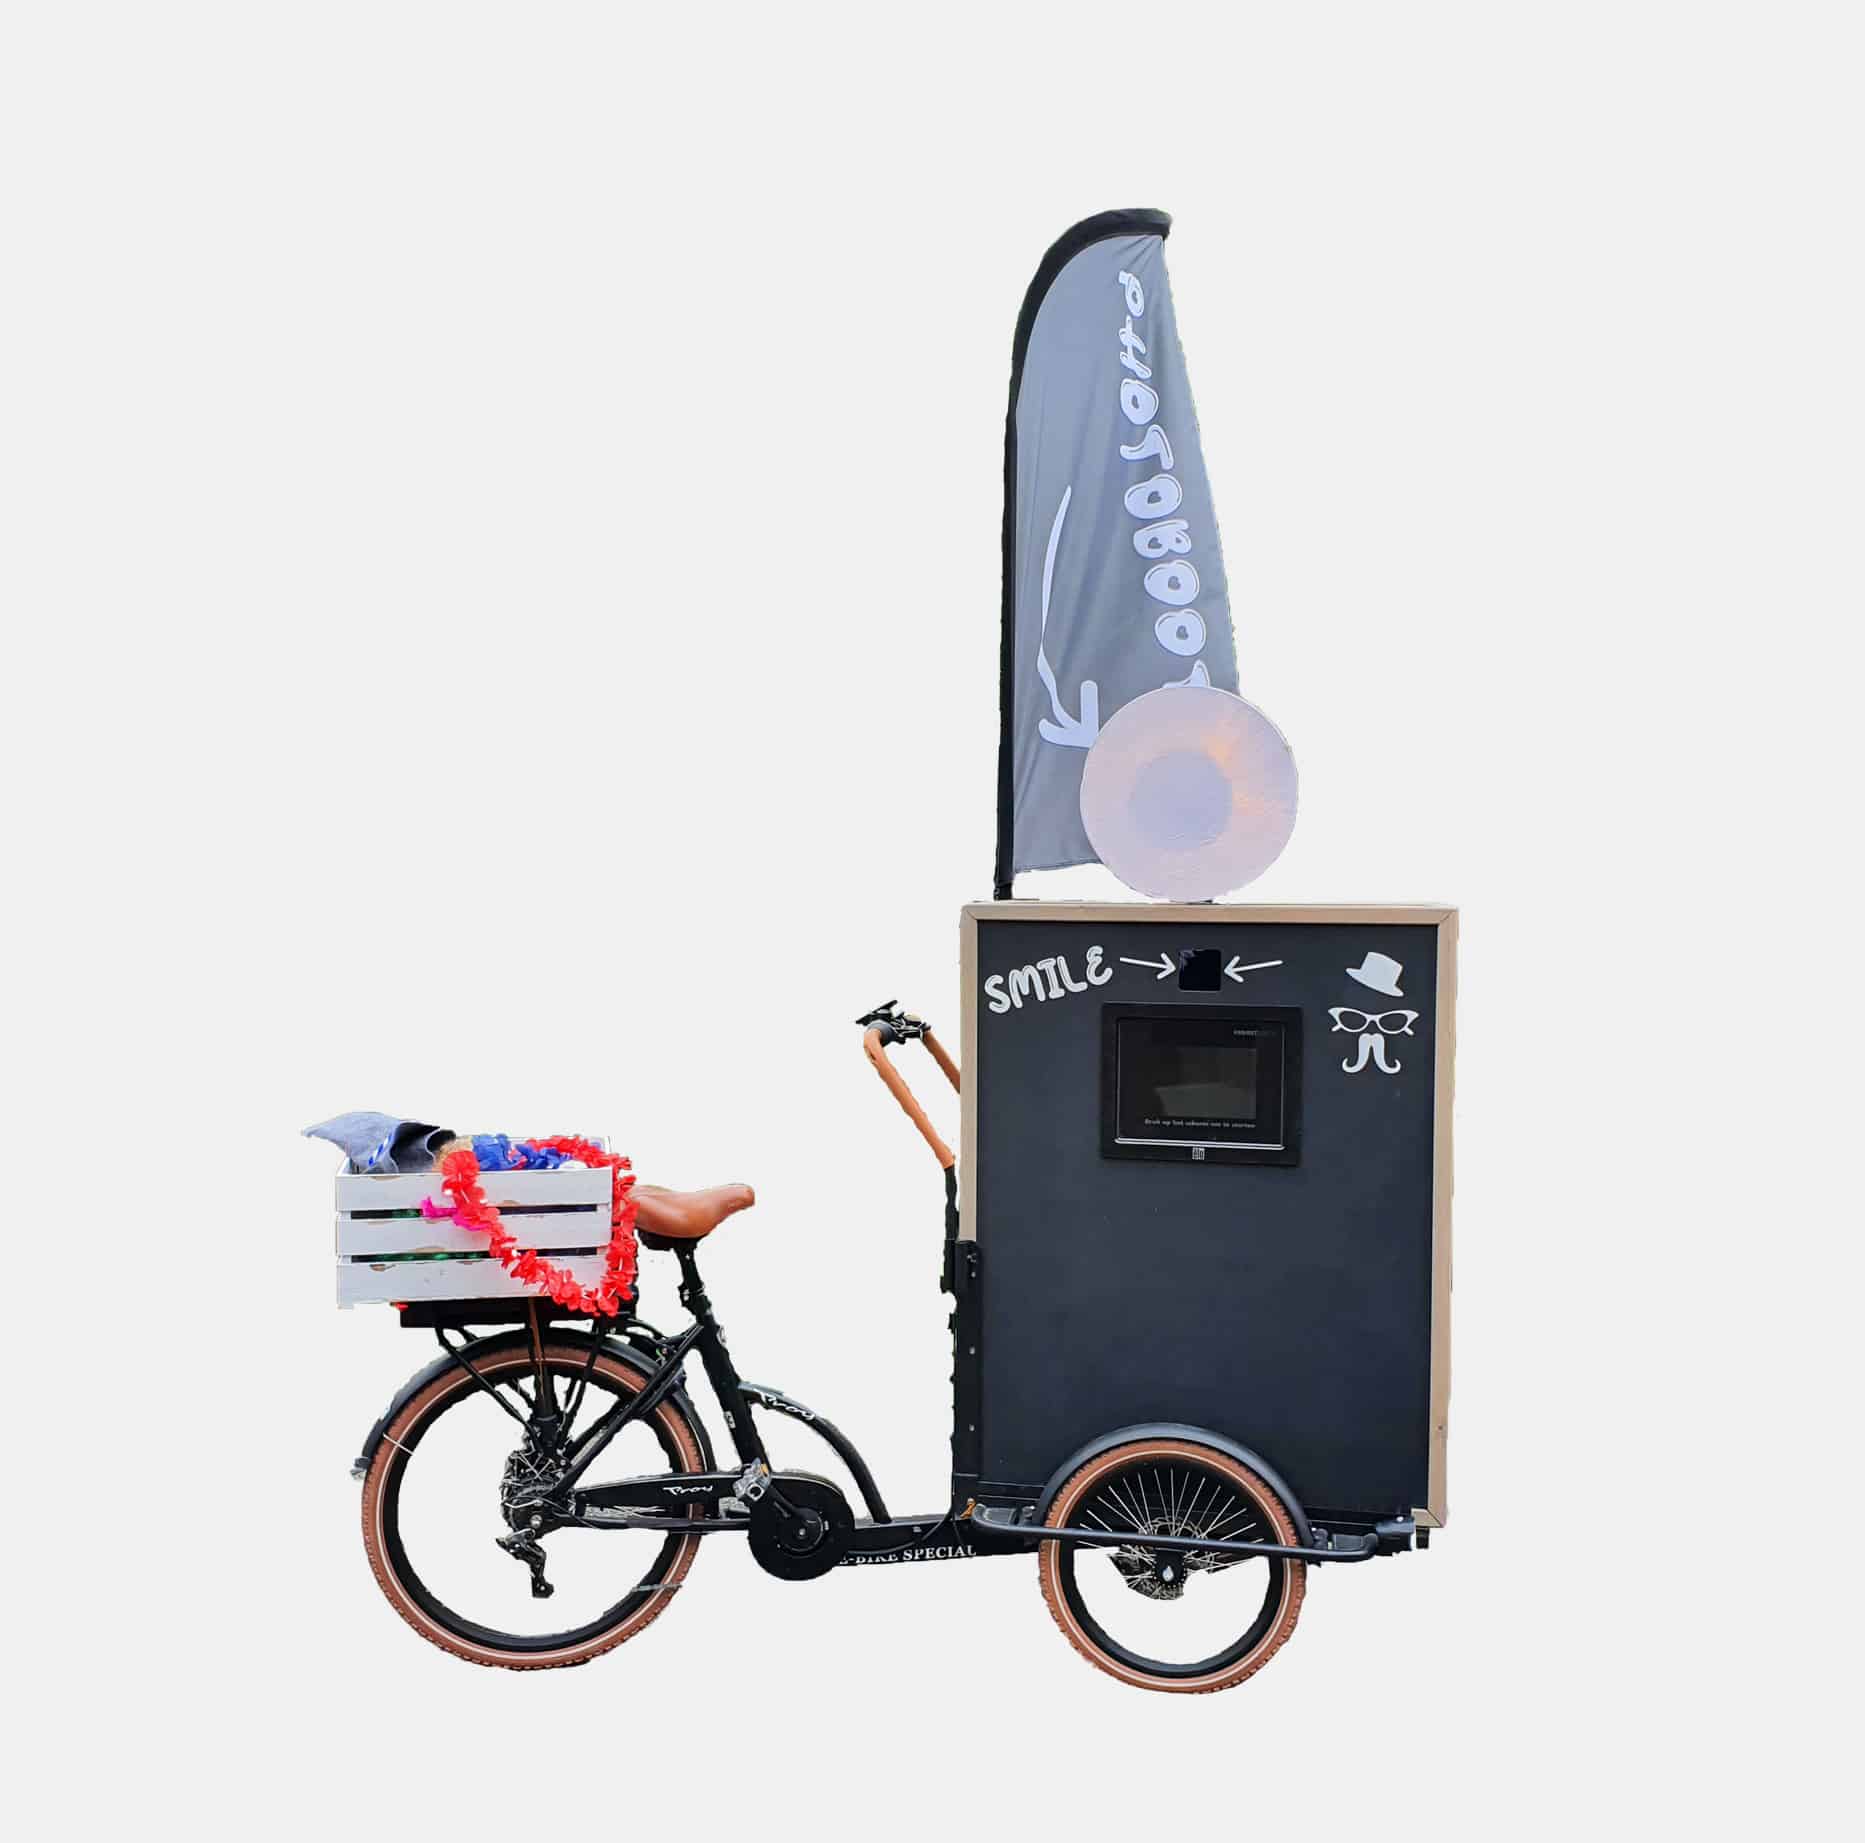 Bakfiets photobooth